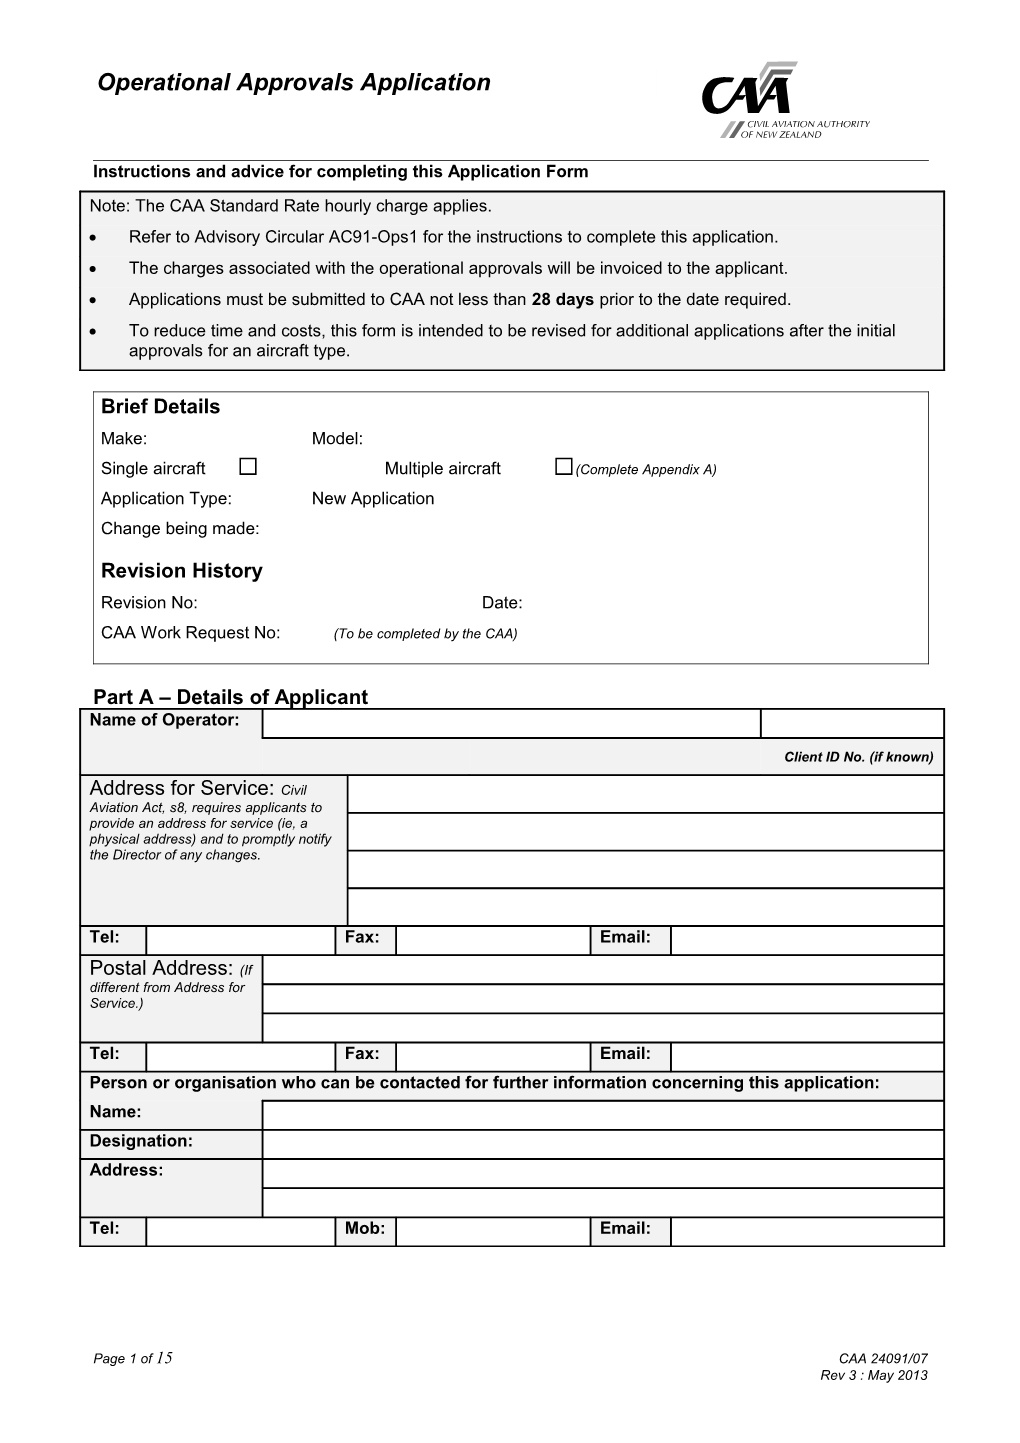 Instructions and Advice for Completing This Application Form